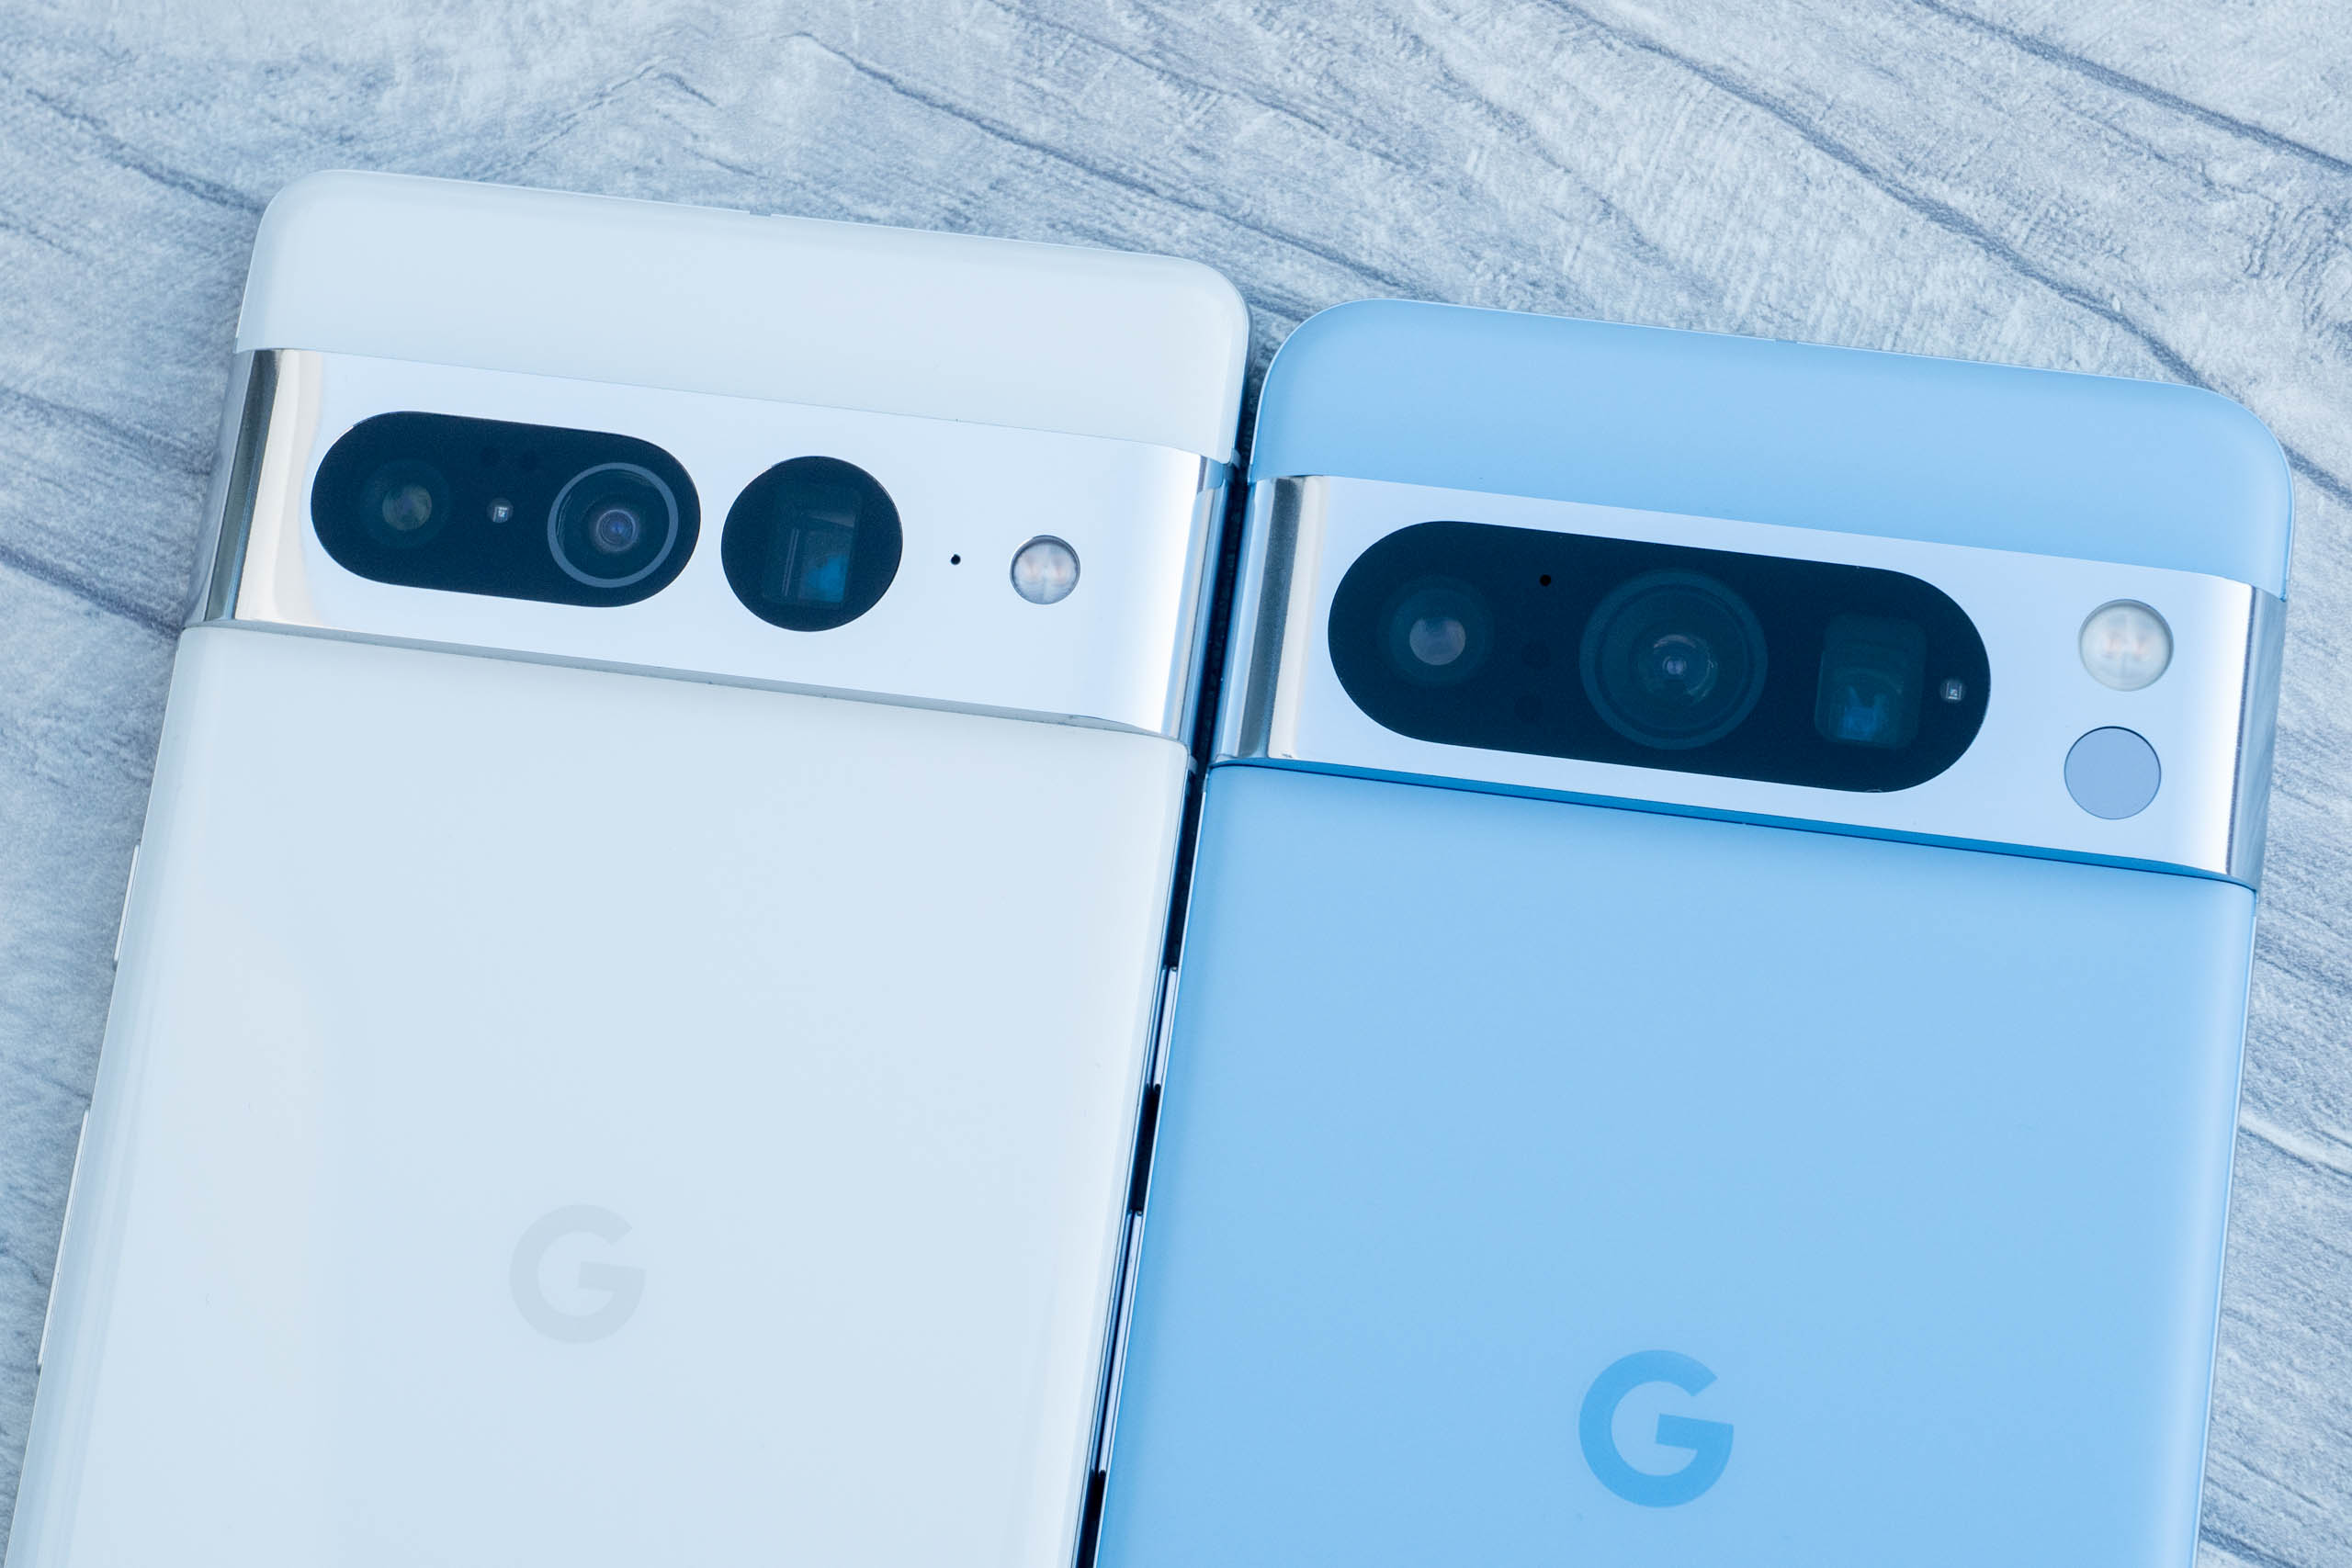 Here's the Pixel 8 Pro in 'Sky' blue [Gallery]